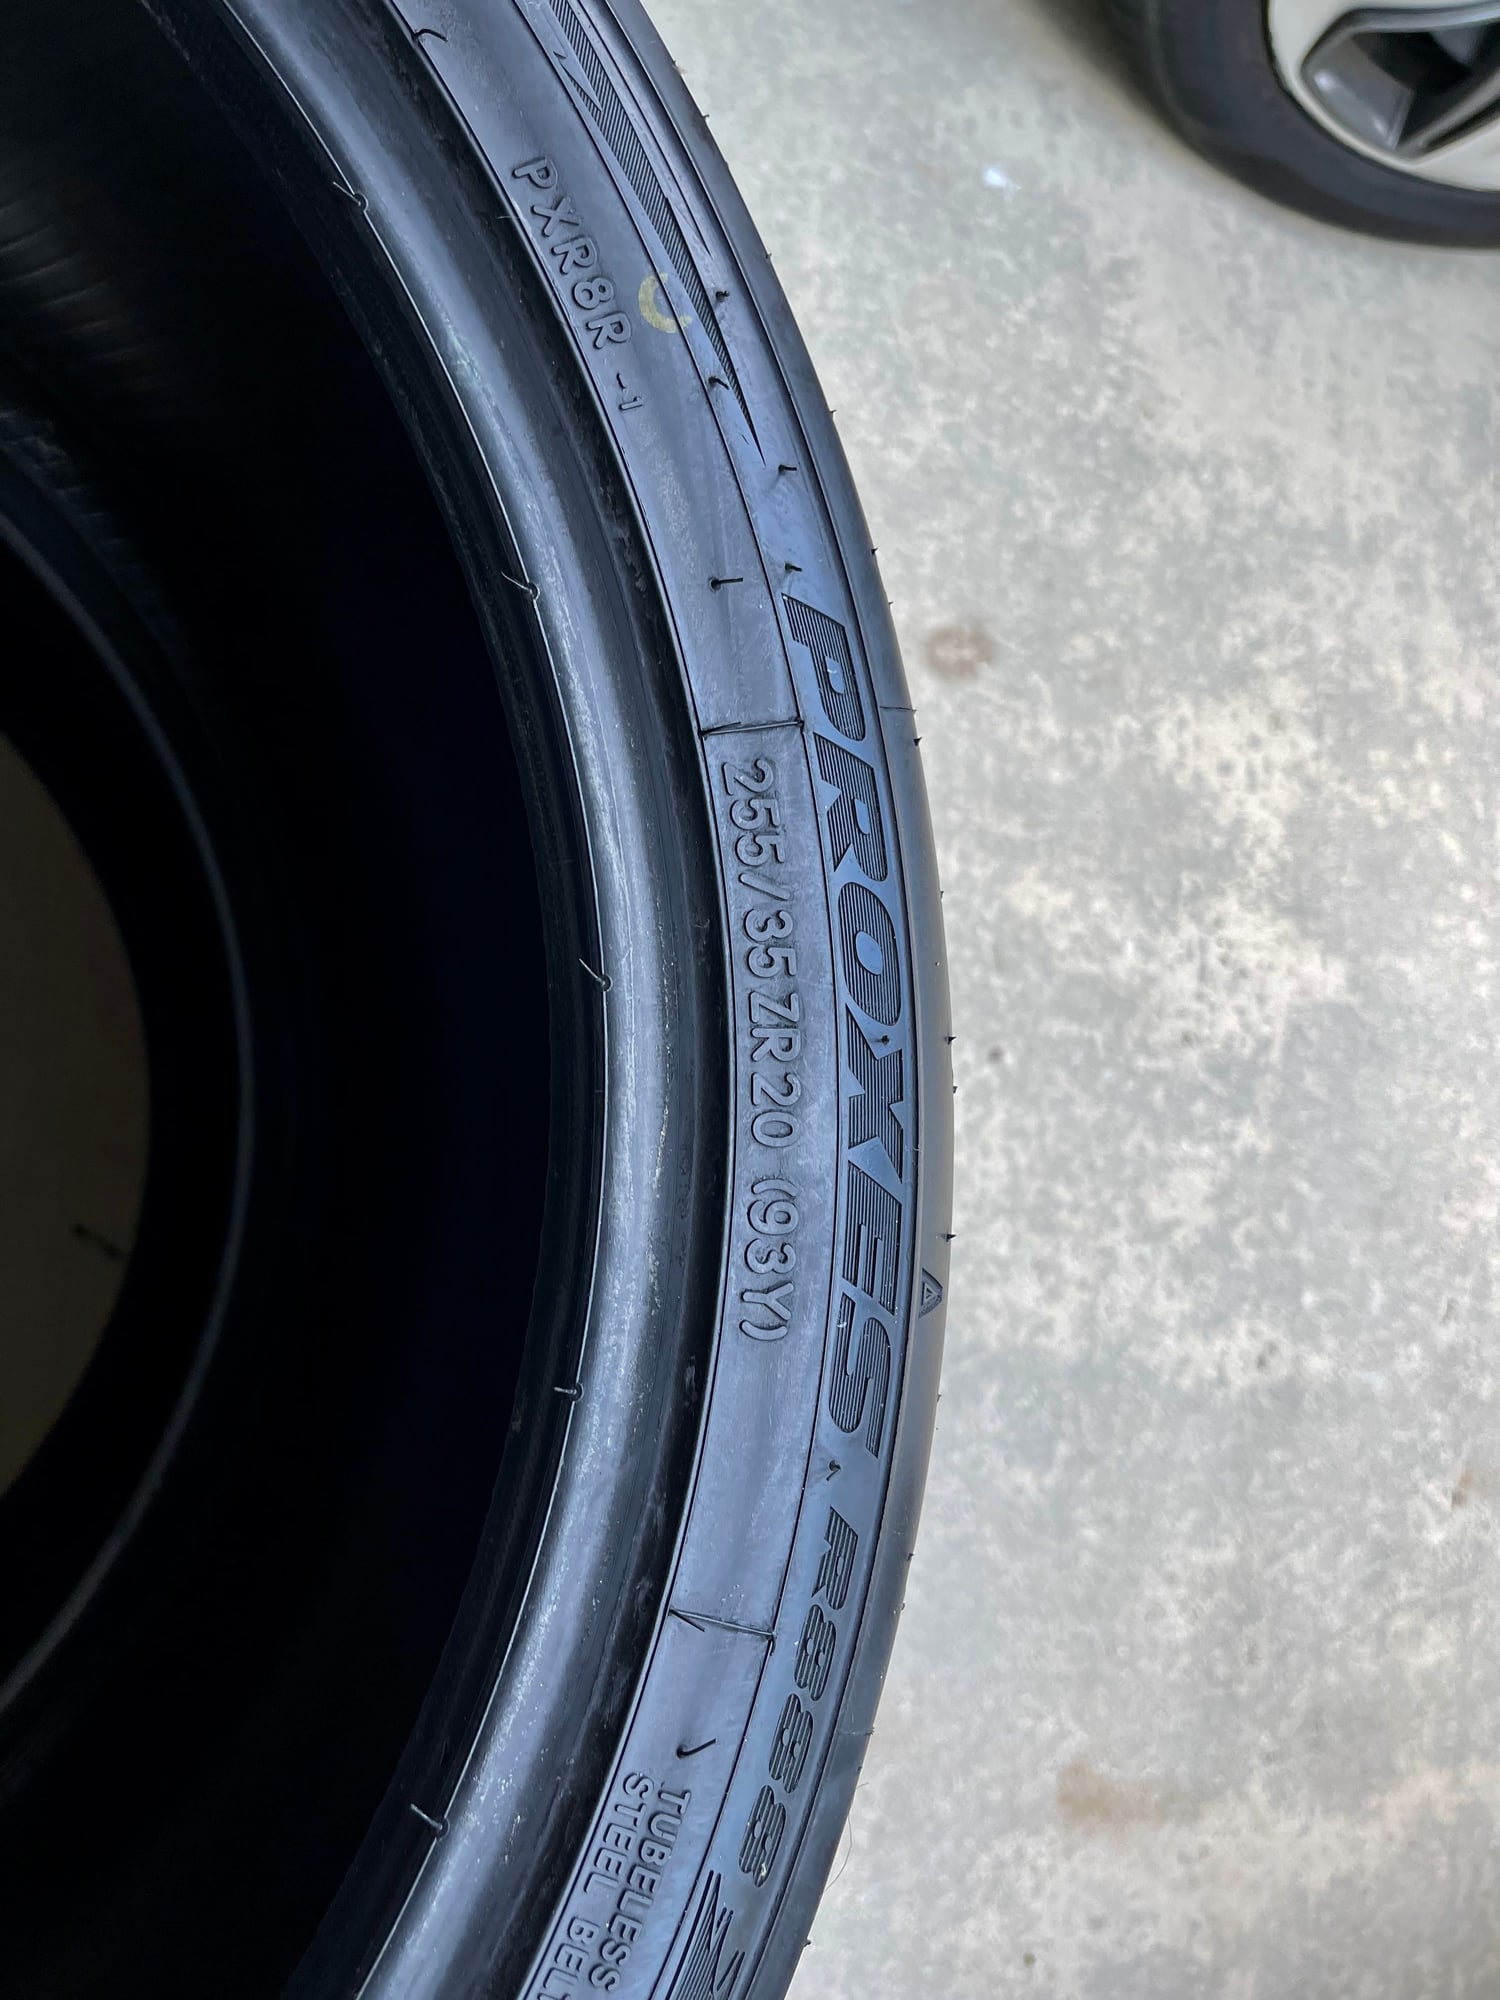 Wheels and Tires/Axles - TOYO Tires R888R like new 255/35/20 - Used - 1998 to 2020 Porsche 911 - Miramar, FL 33027, United States